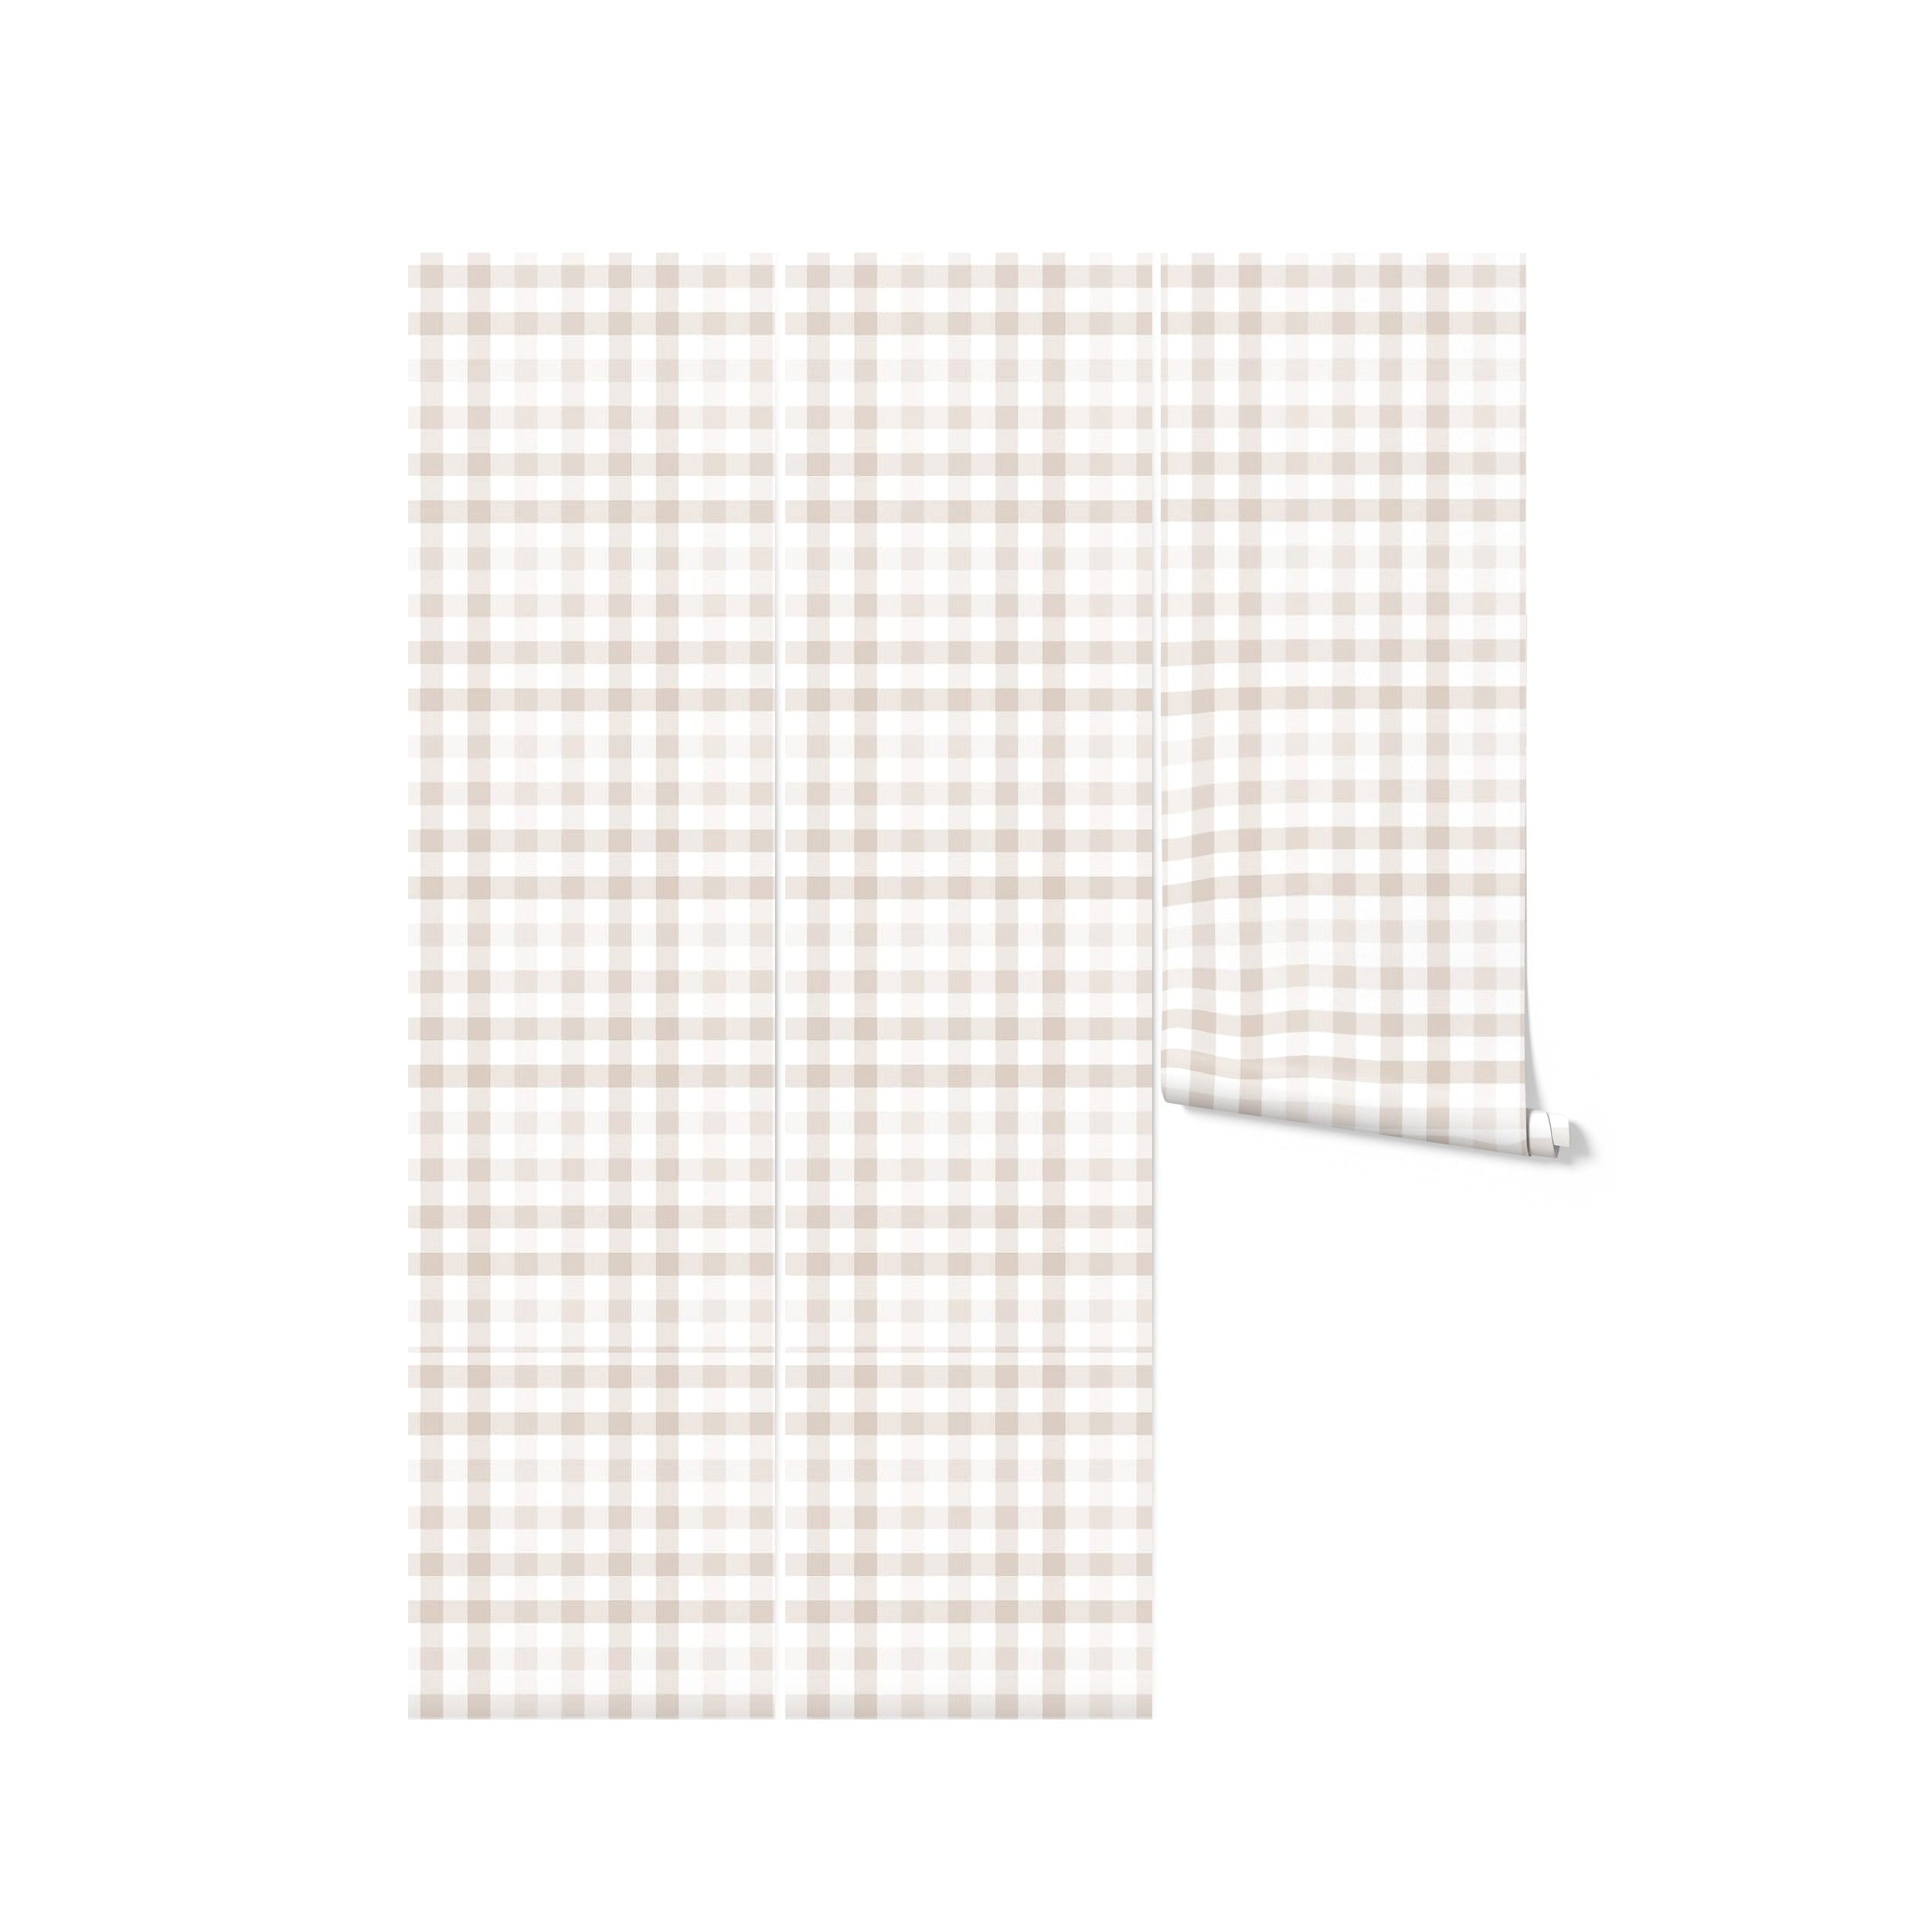 An image of a roll of beige and white gingham wallpaper partially unrolled. The wallpaper features a small checkered pattern, suitable for adding a classic touch to room decor.